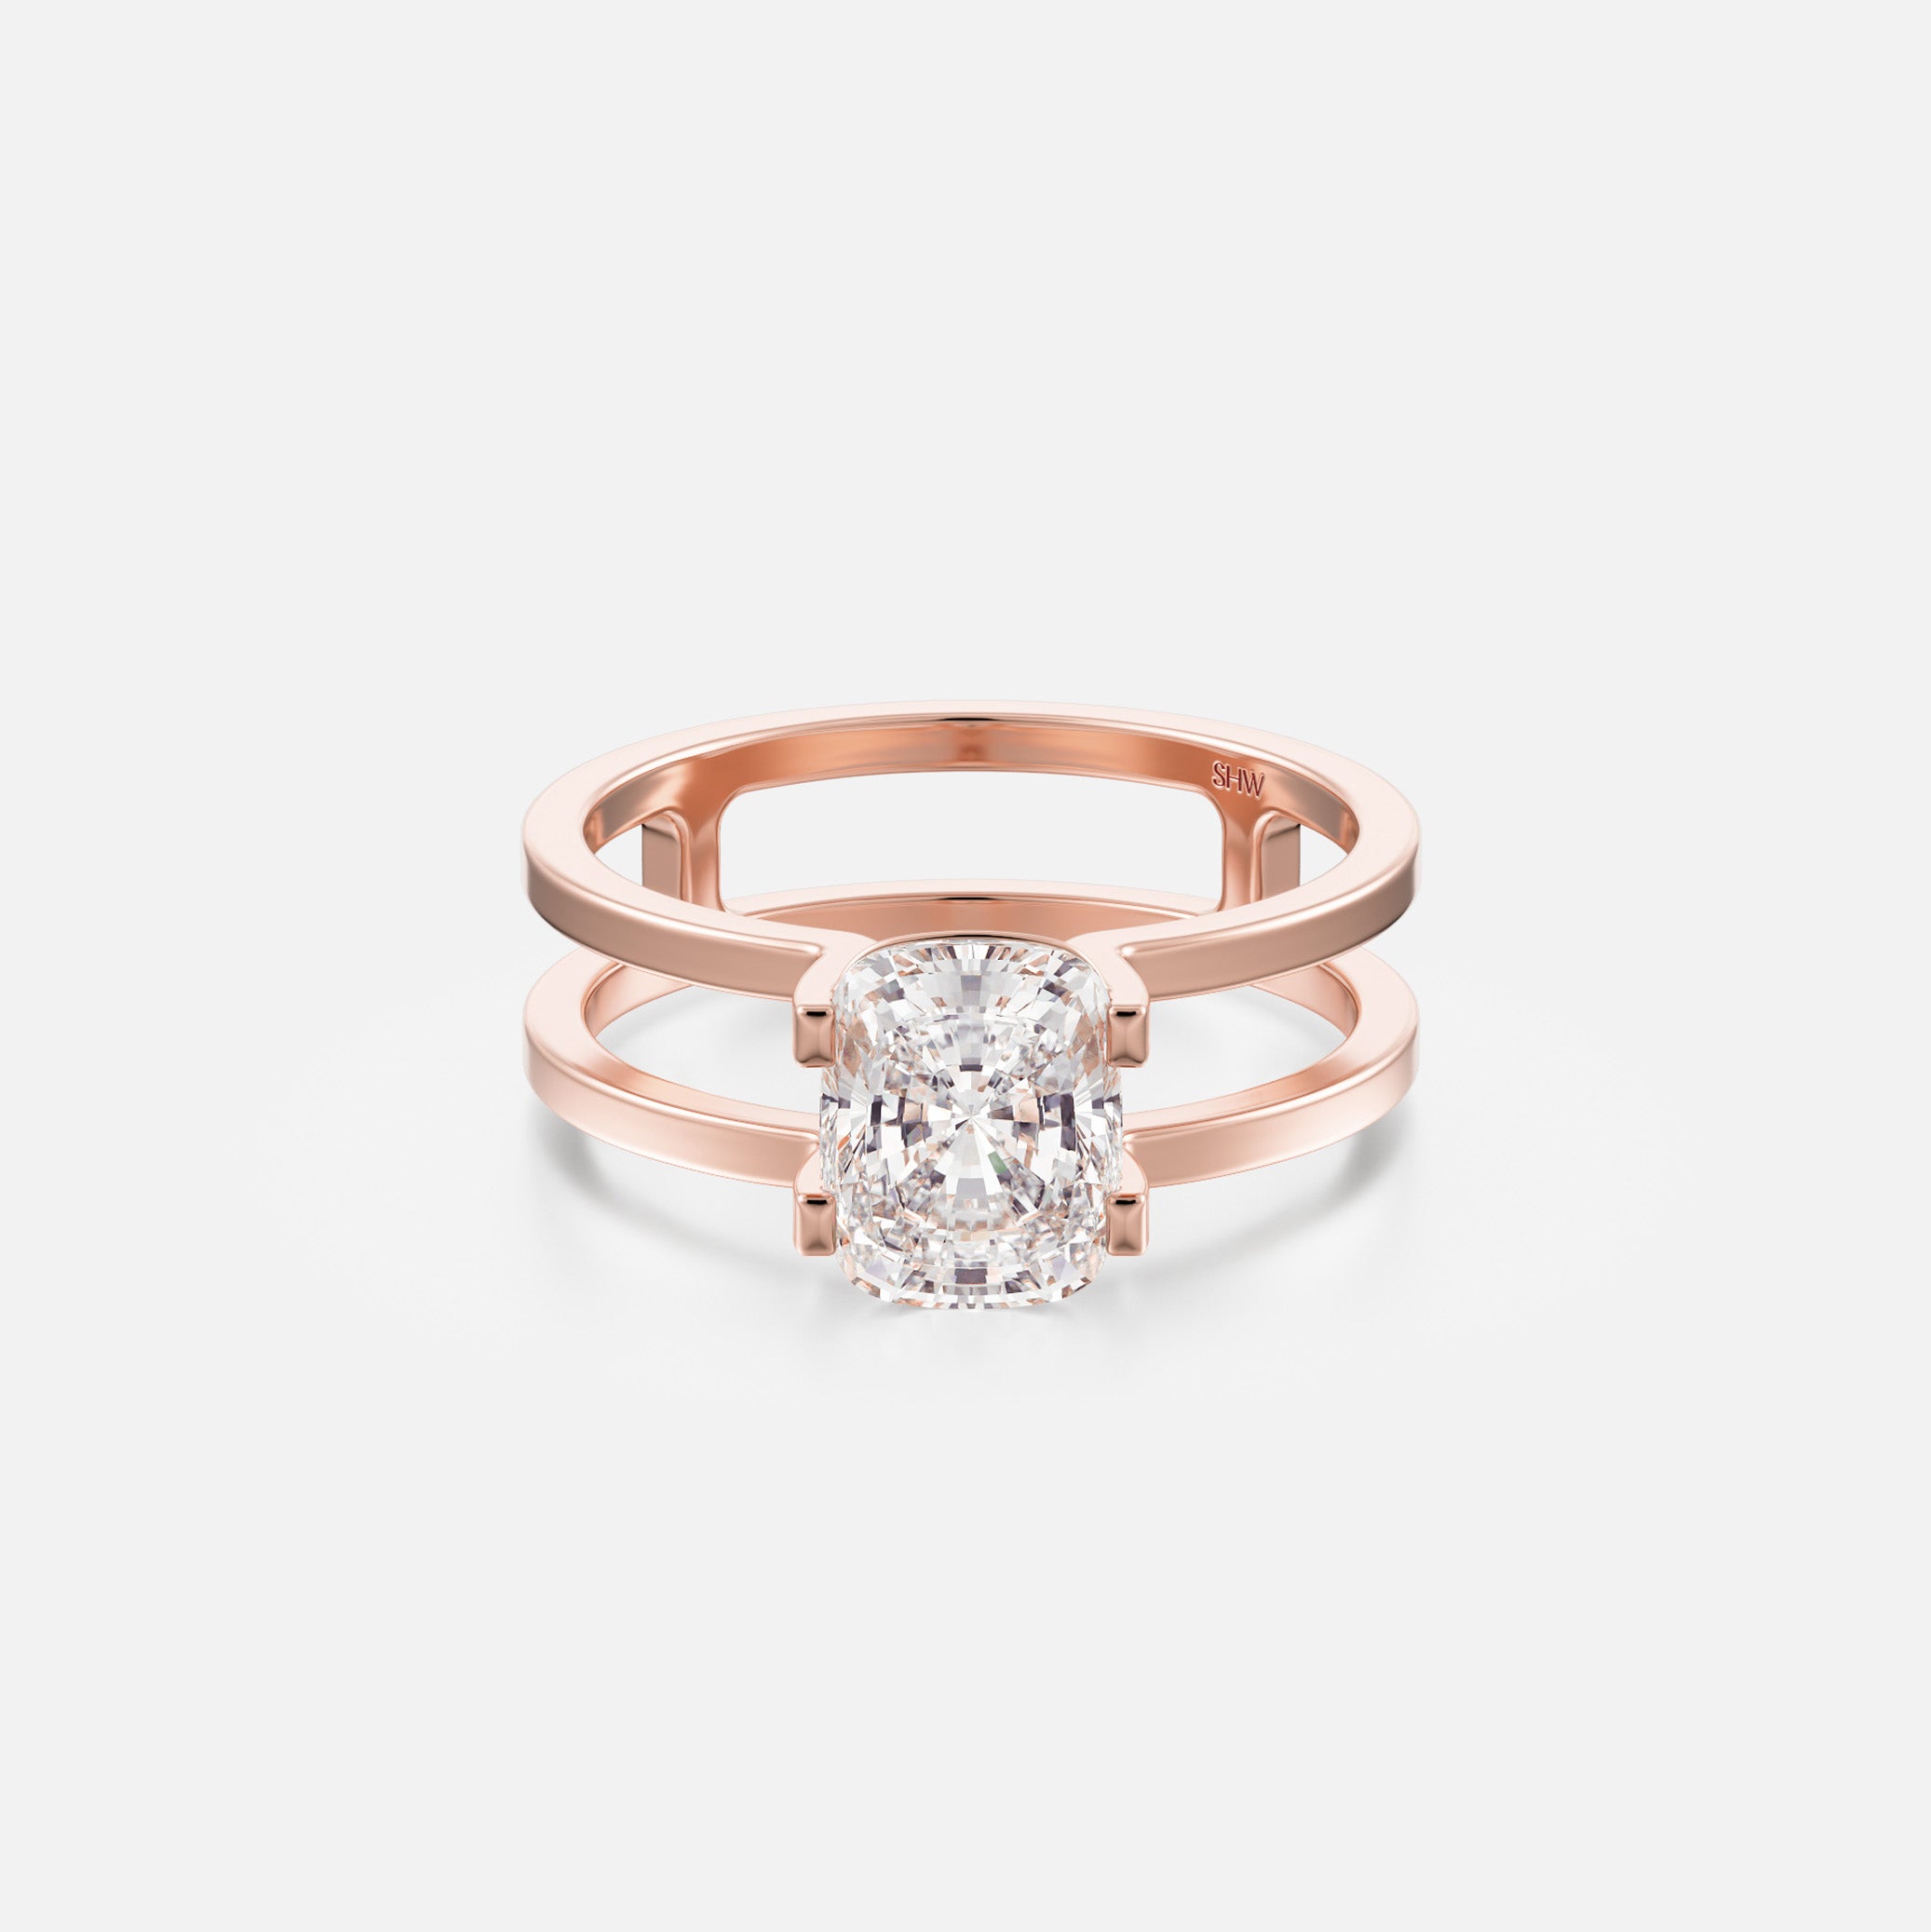 Mes Double Band North South Cushion Simple Engagement Ring Setting in 14k recycled yellow, white, rose gold or platinum handmade by SHW Fine Jewelry NYC